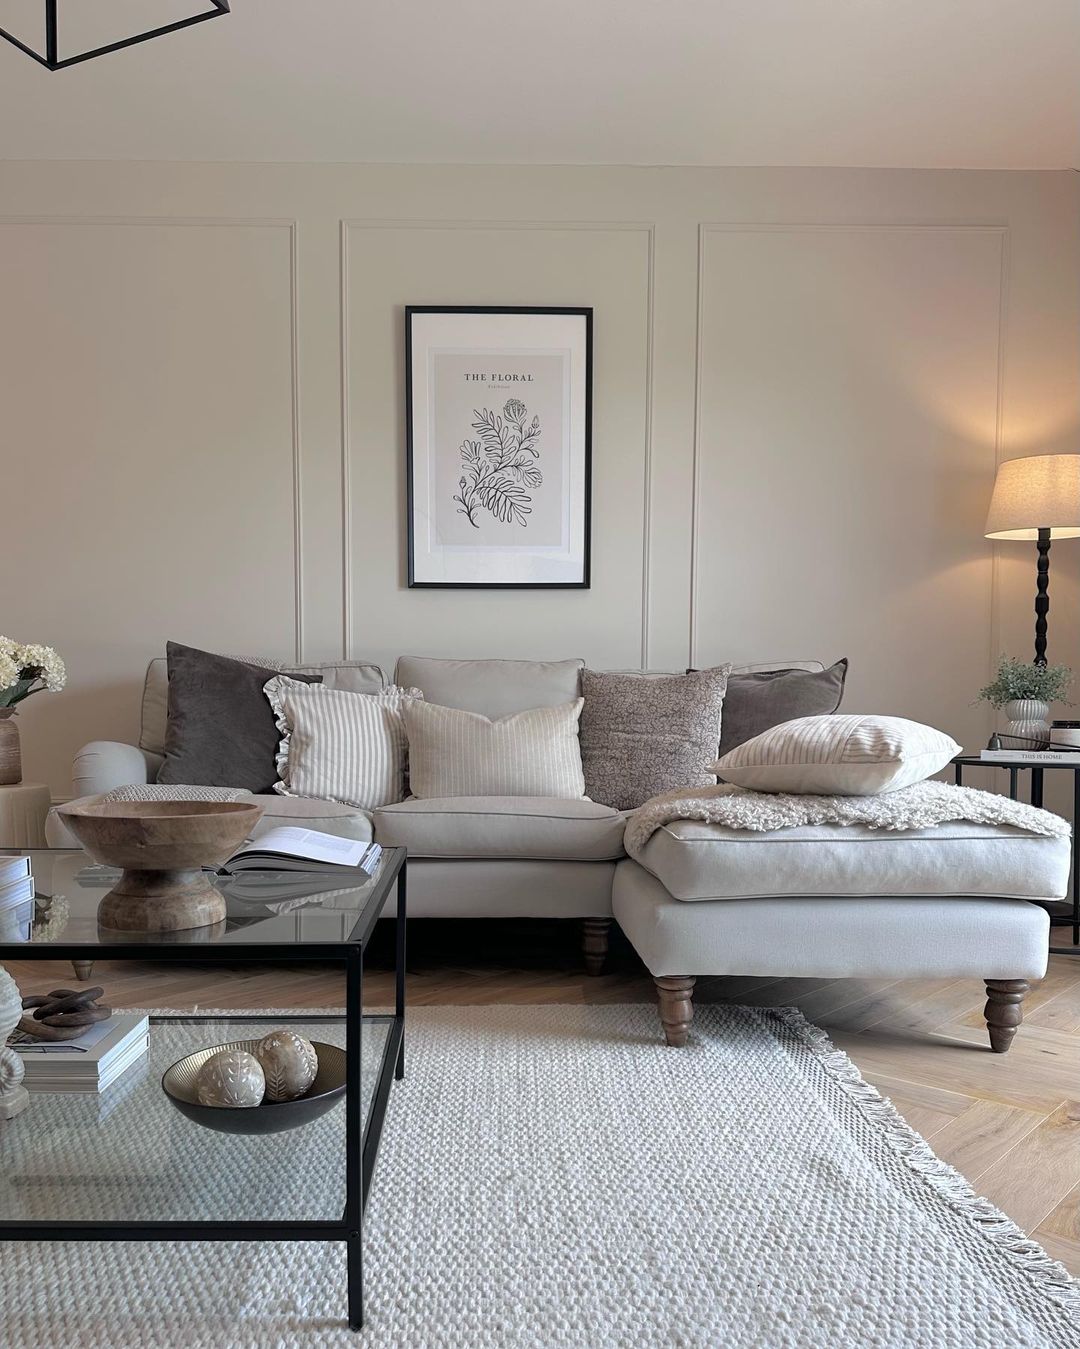 What It Takes to Master Styling like a Pro with Throw Pillows